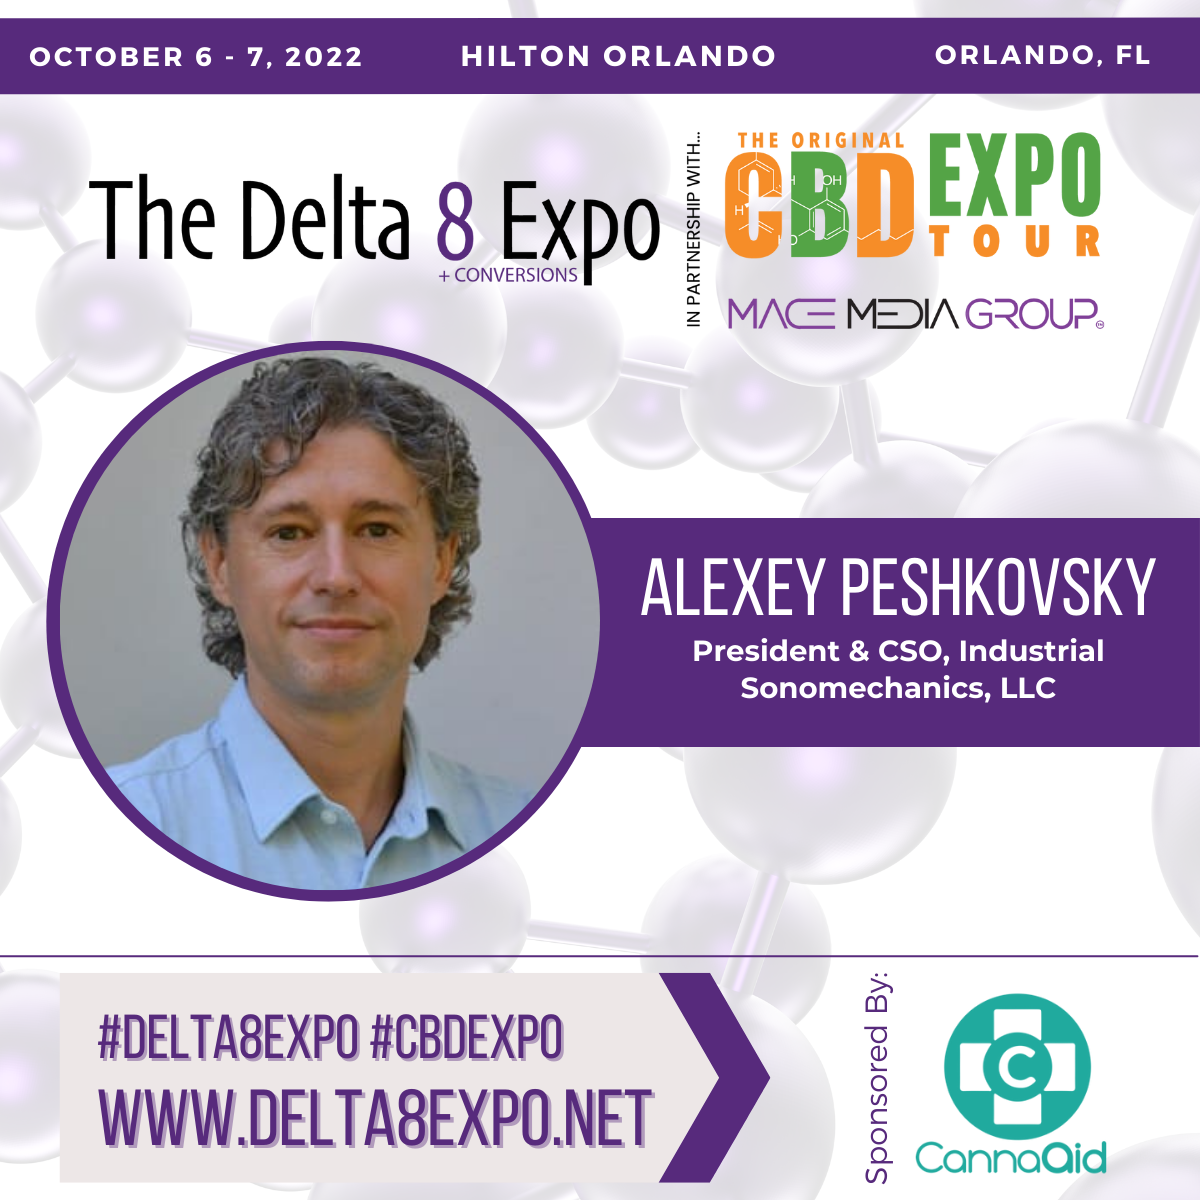 Dr. Alexey Peshkovsky to present at The Delta 8 + Conversions Expo in Partnership with The CBD Expo